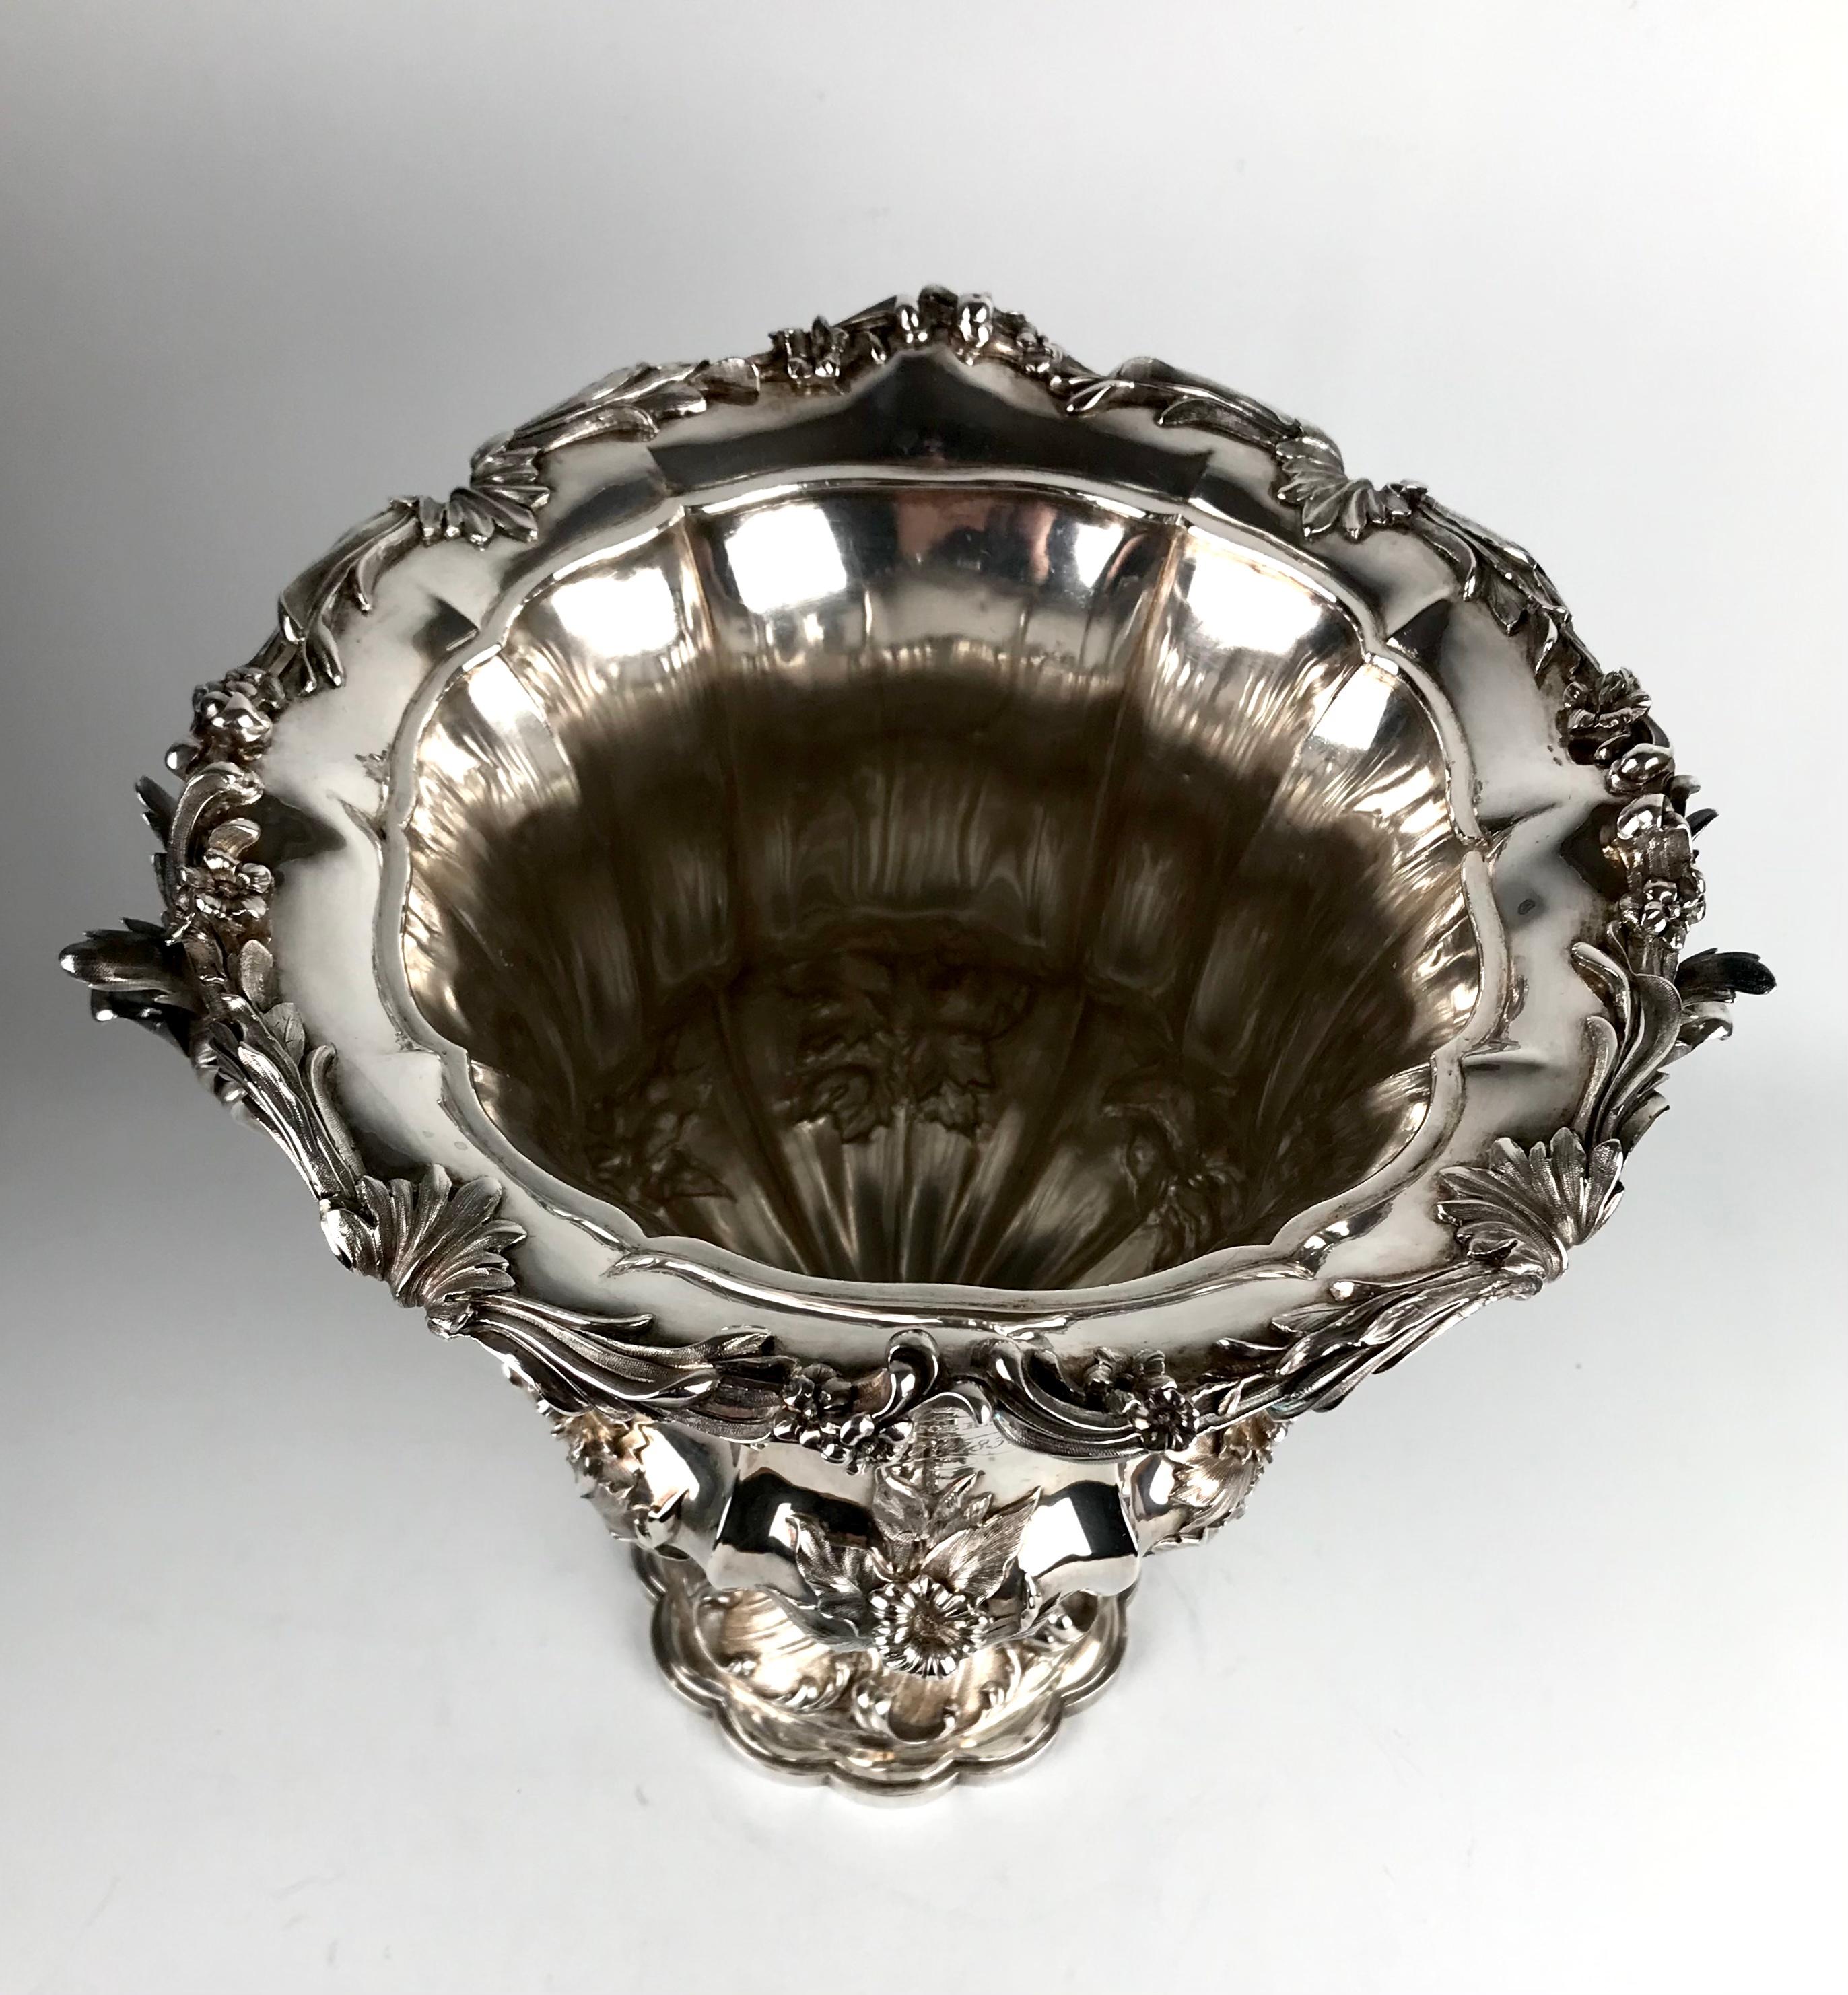 A magnificent solid silver wine cooler with wonderful hammered detailing of acanthus leaves and flowers.
The scalloped base rises up on acanthus leaves to a knop of flowers and leaves, ribbed body agin with floral motifs to a garland rim of leaves